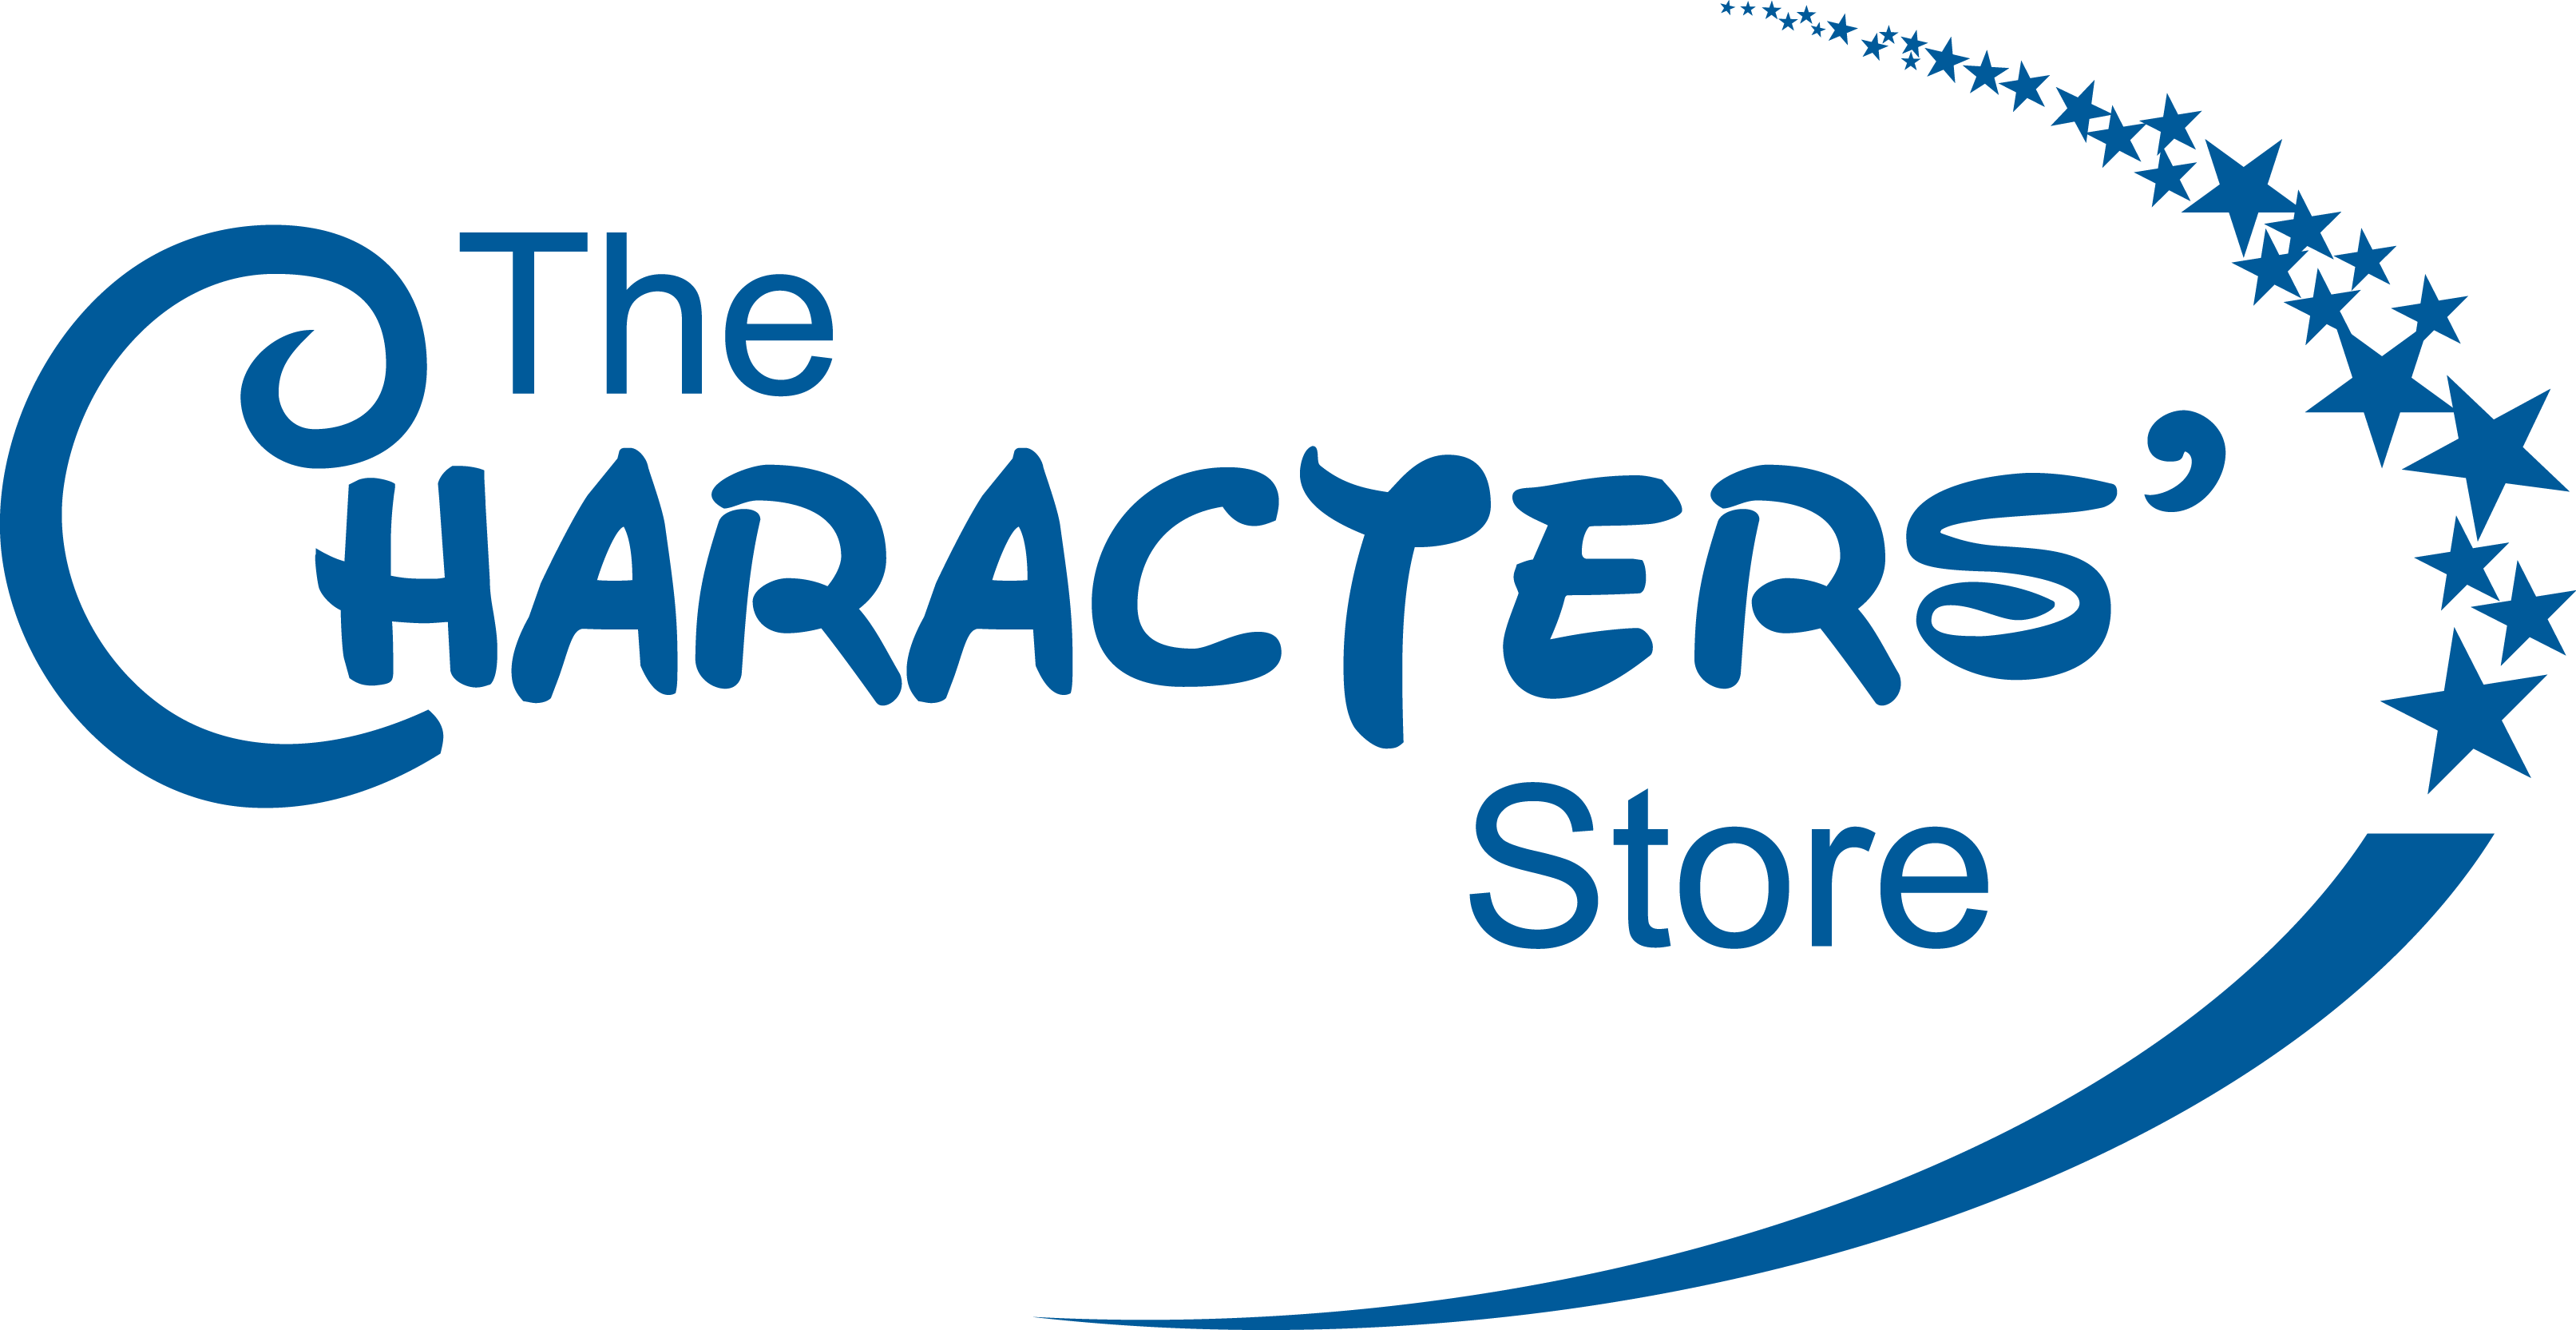 The Characters Store